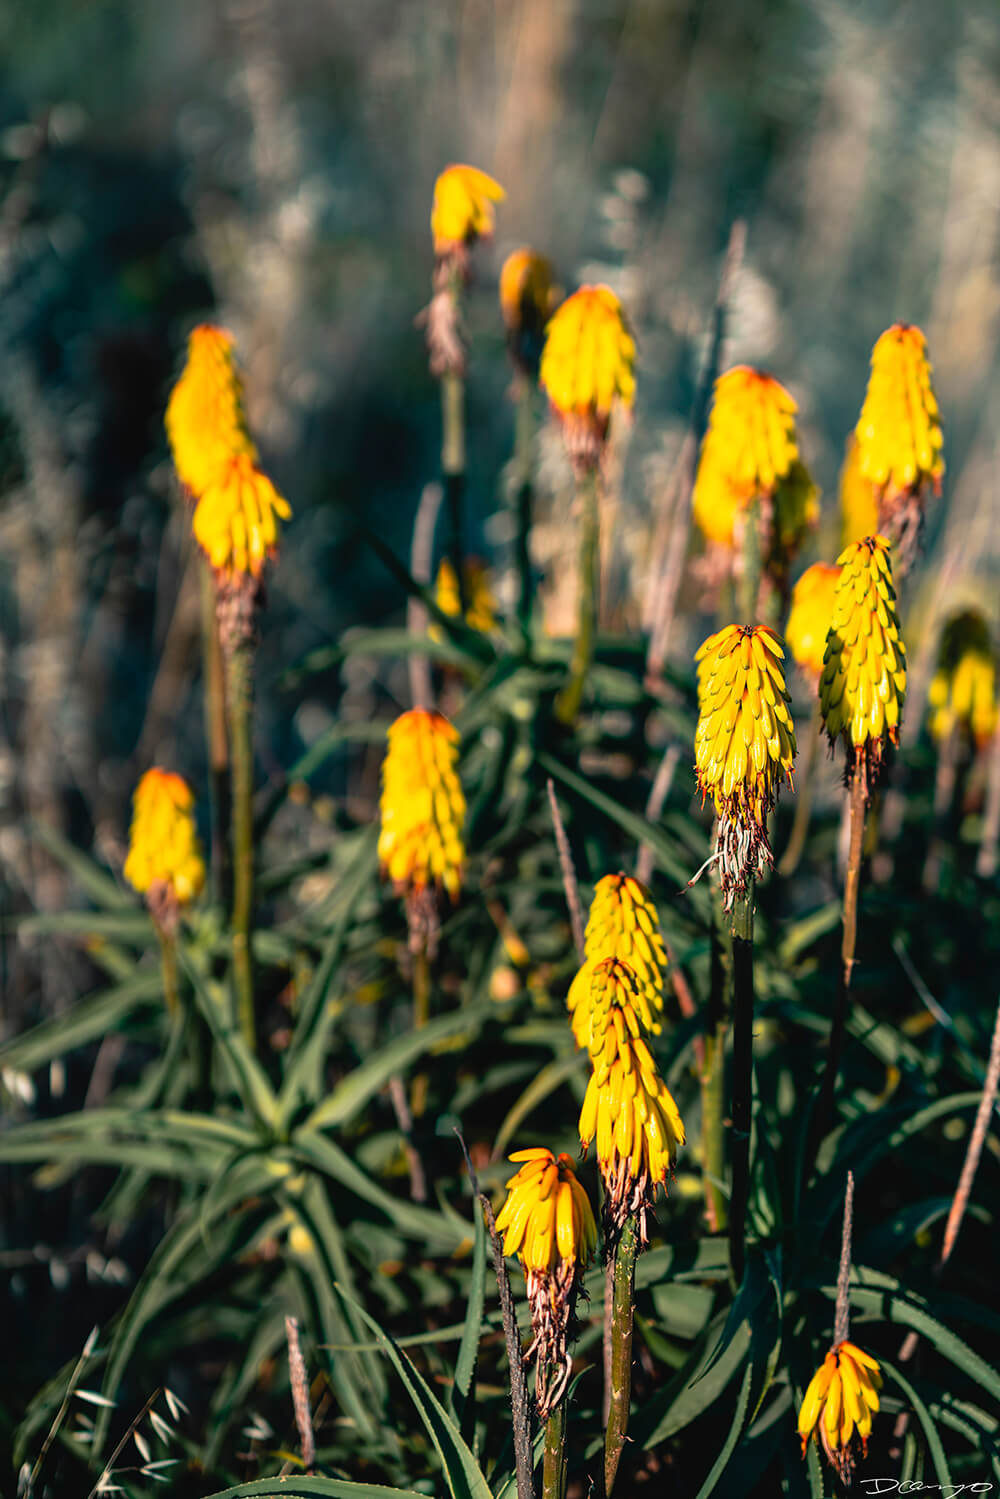 Floral, natural, and textural photos from my travels in the Bay Area in California, and more.